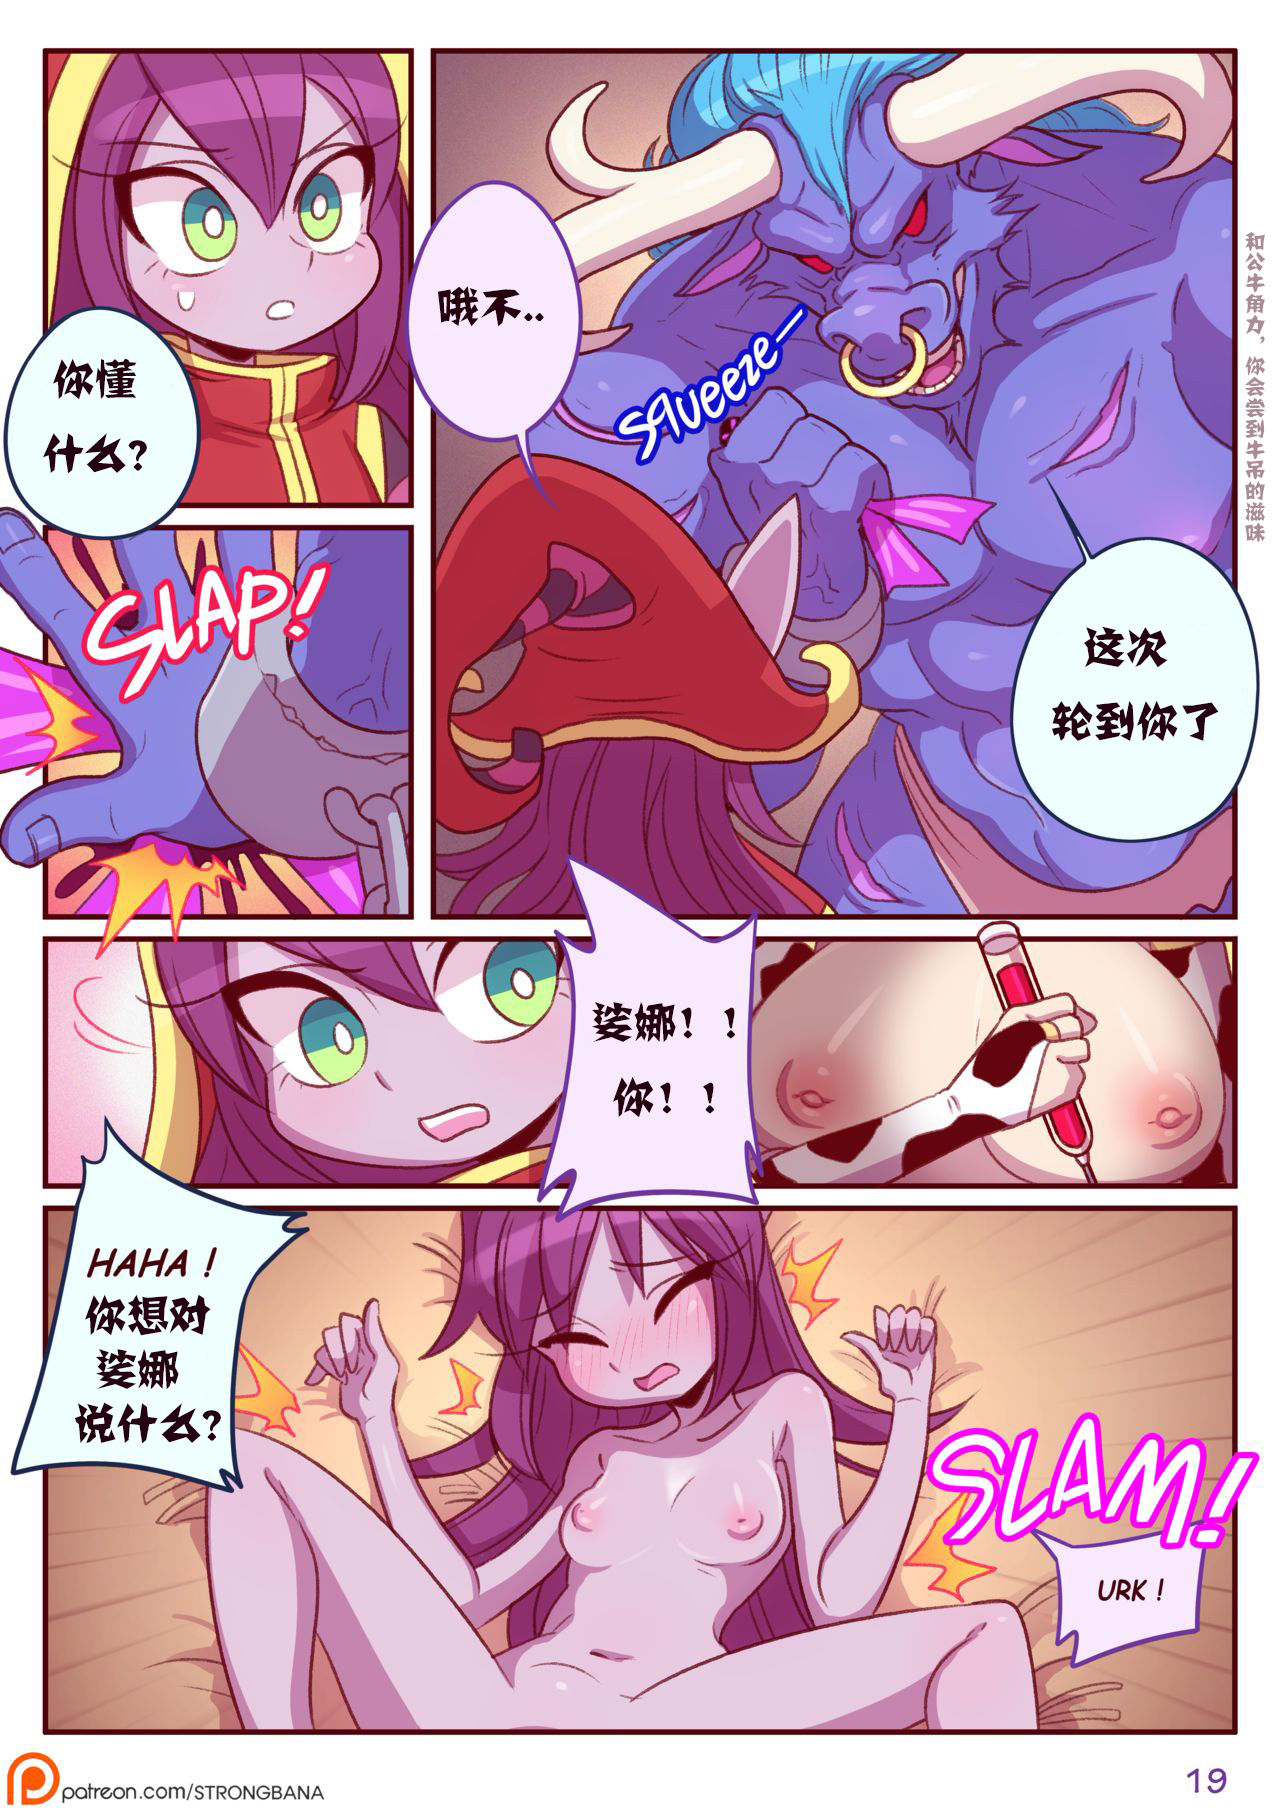 [Strong bana] I Need Some Milk (League of Legends) [Chinese] 